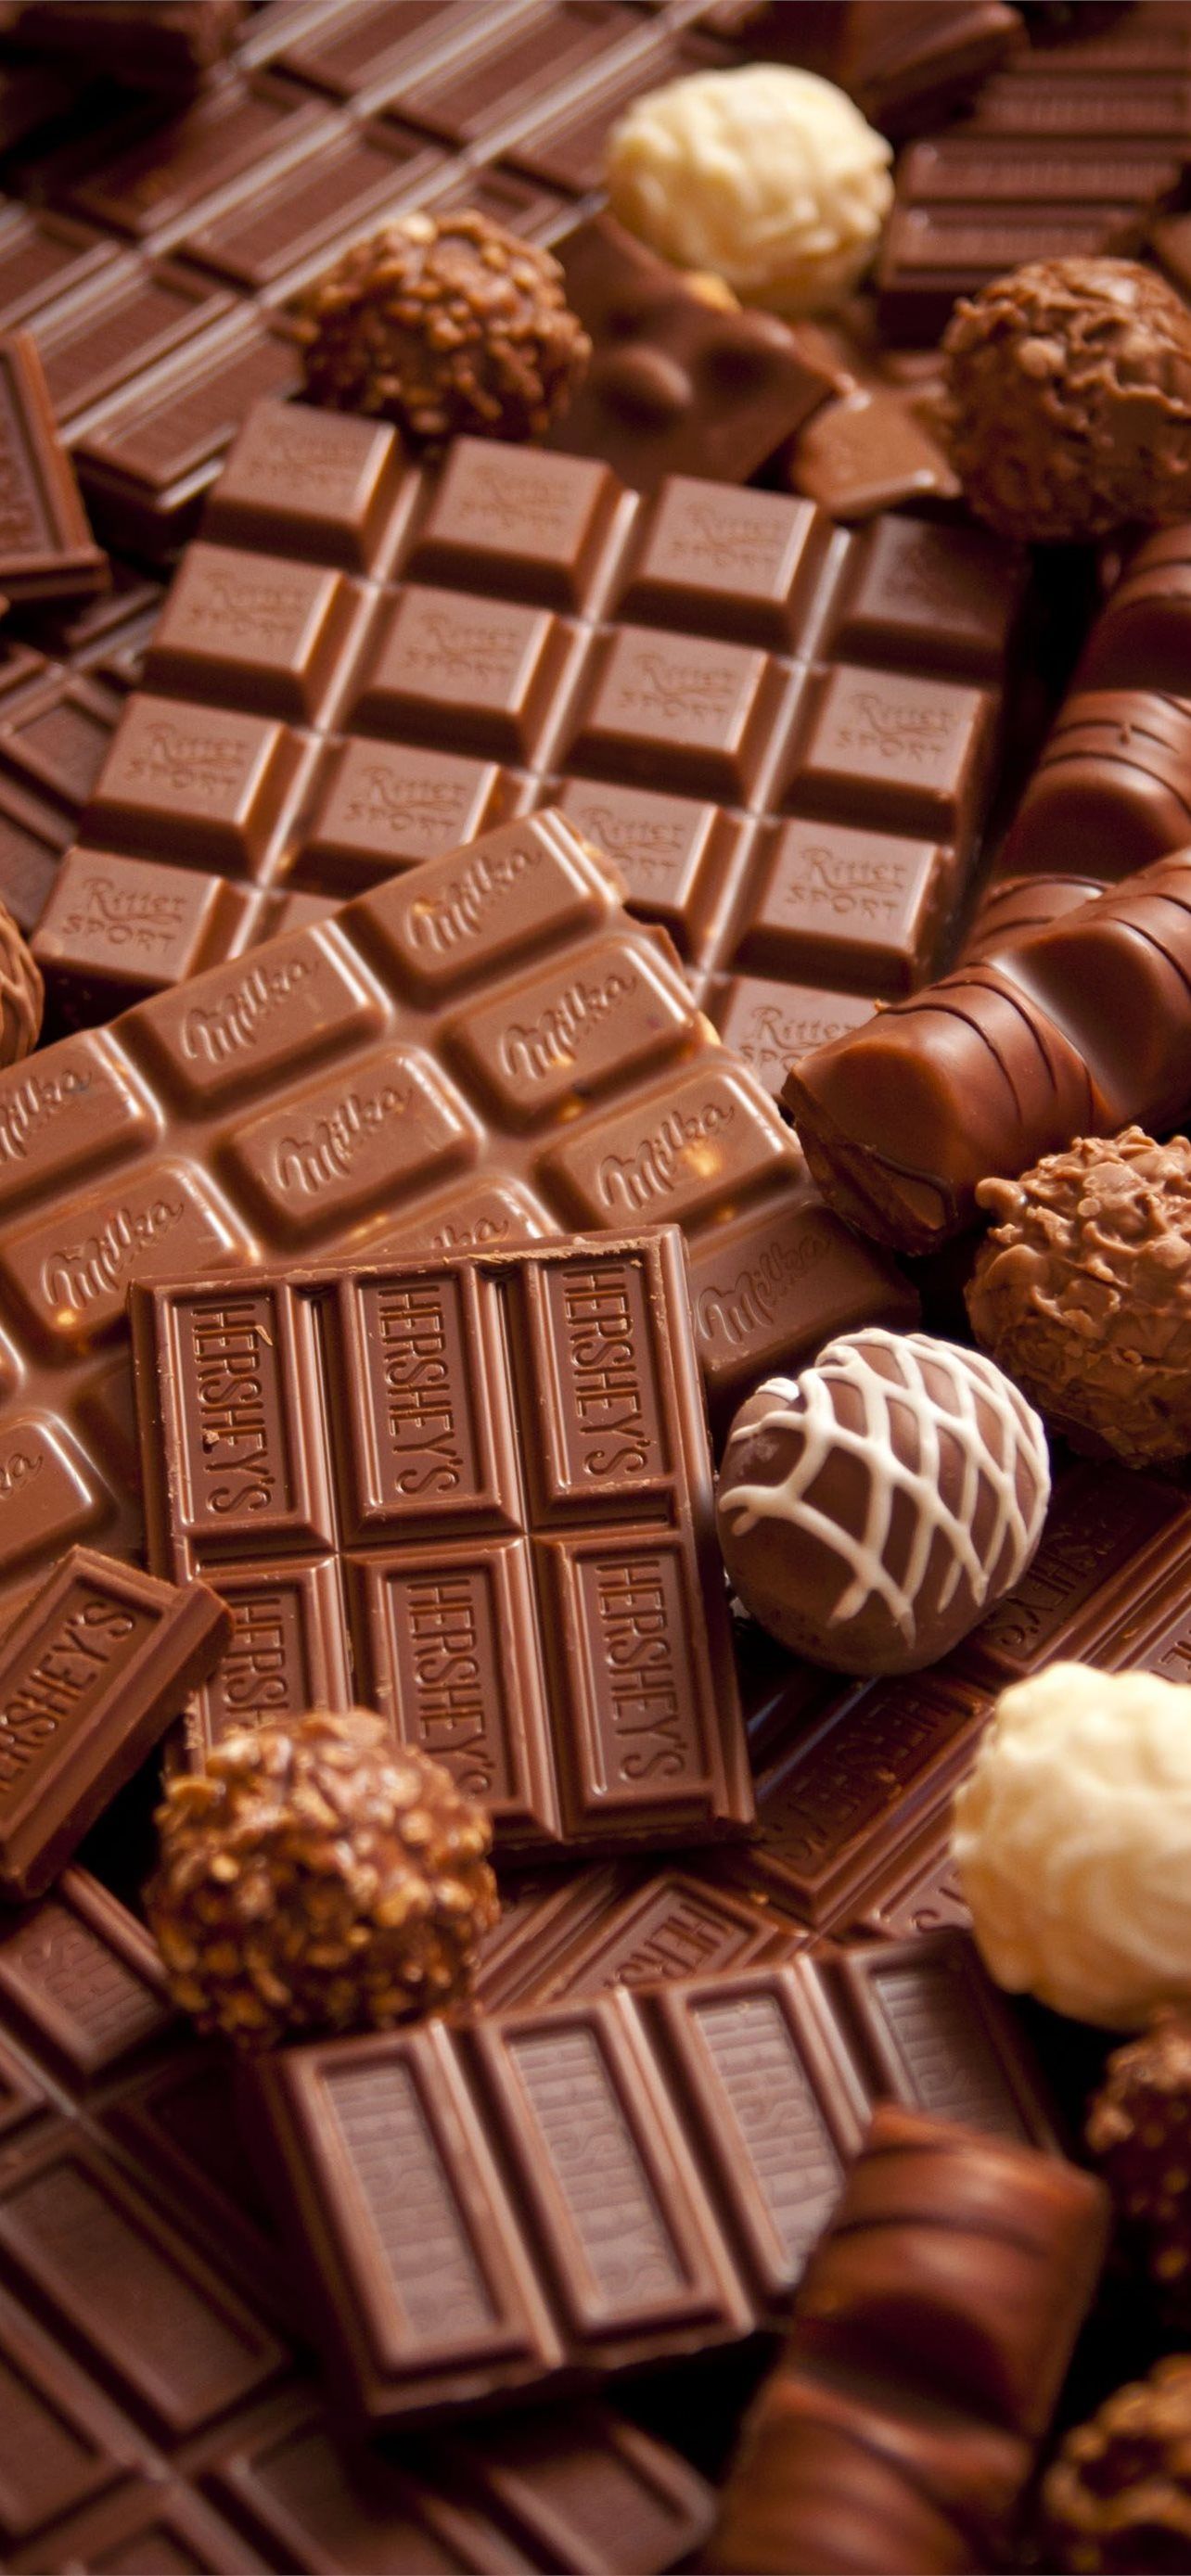 A close up of chocolate bars and other candy - Chocolate